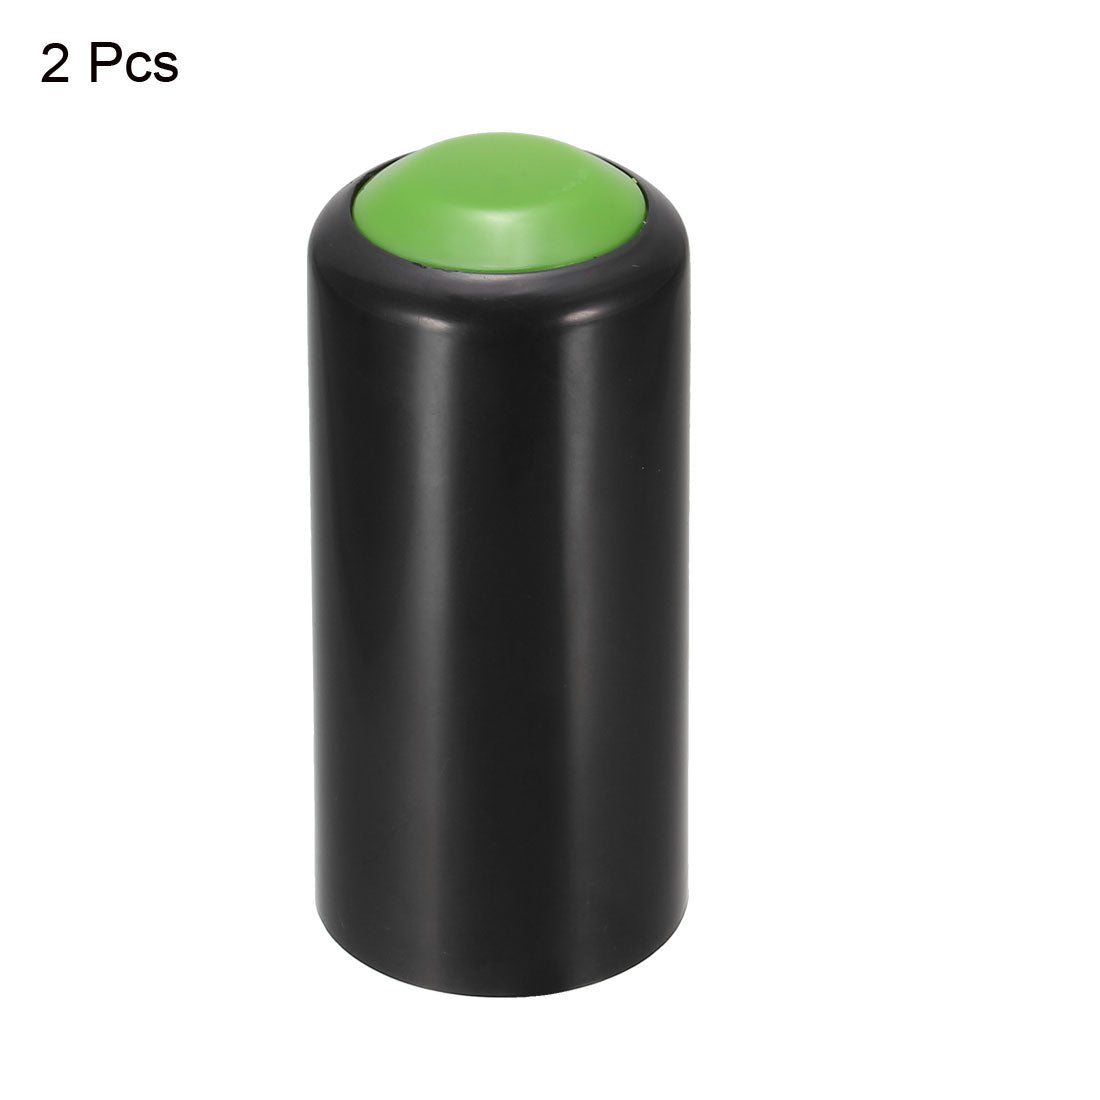 uxcell Uxcell Battery Cover Mic Battery Screw on Cap Cup Cover for PGX24 SLX24 PG58 SM58 BETA58 Wireless Green 2Pcs